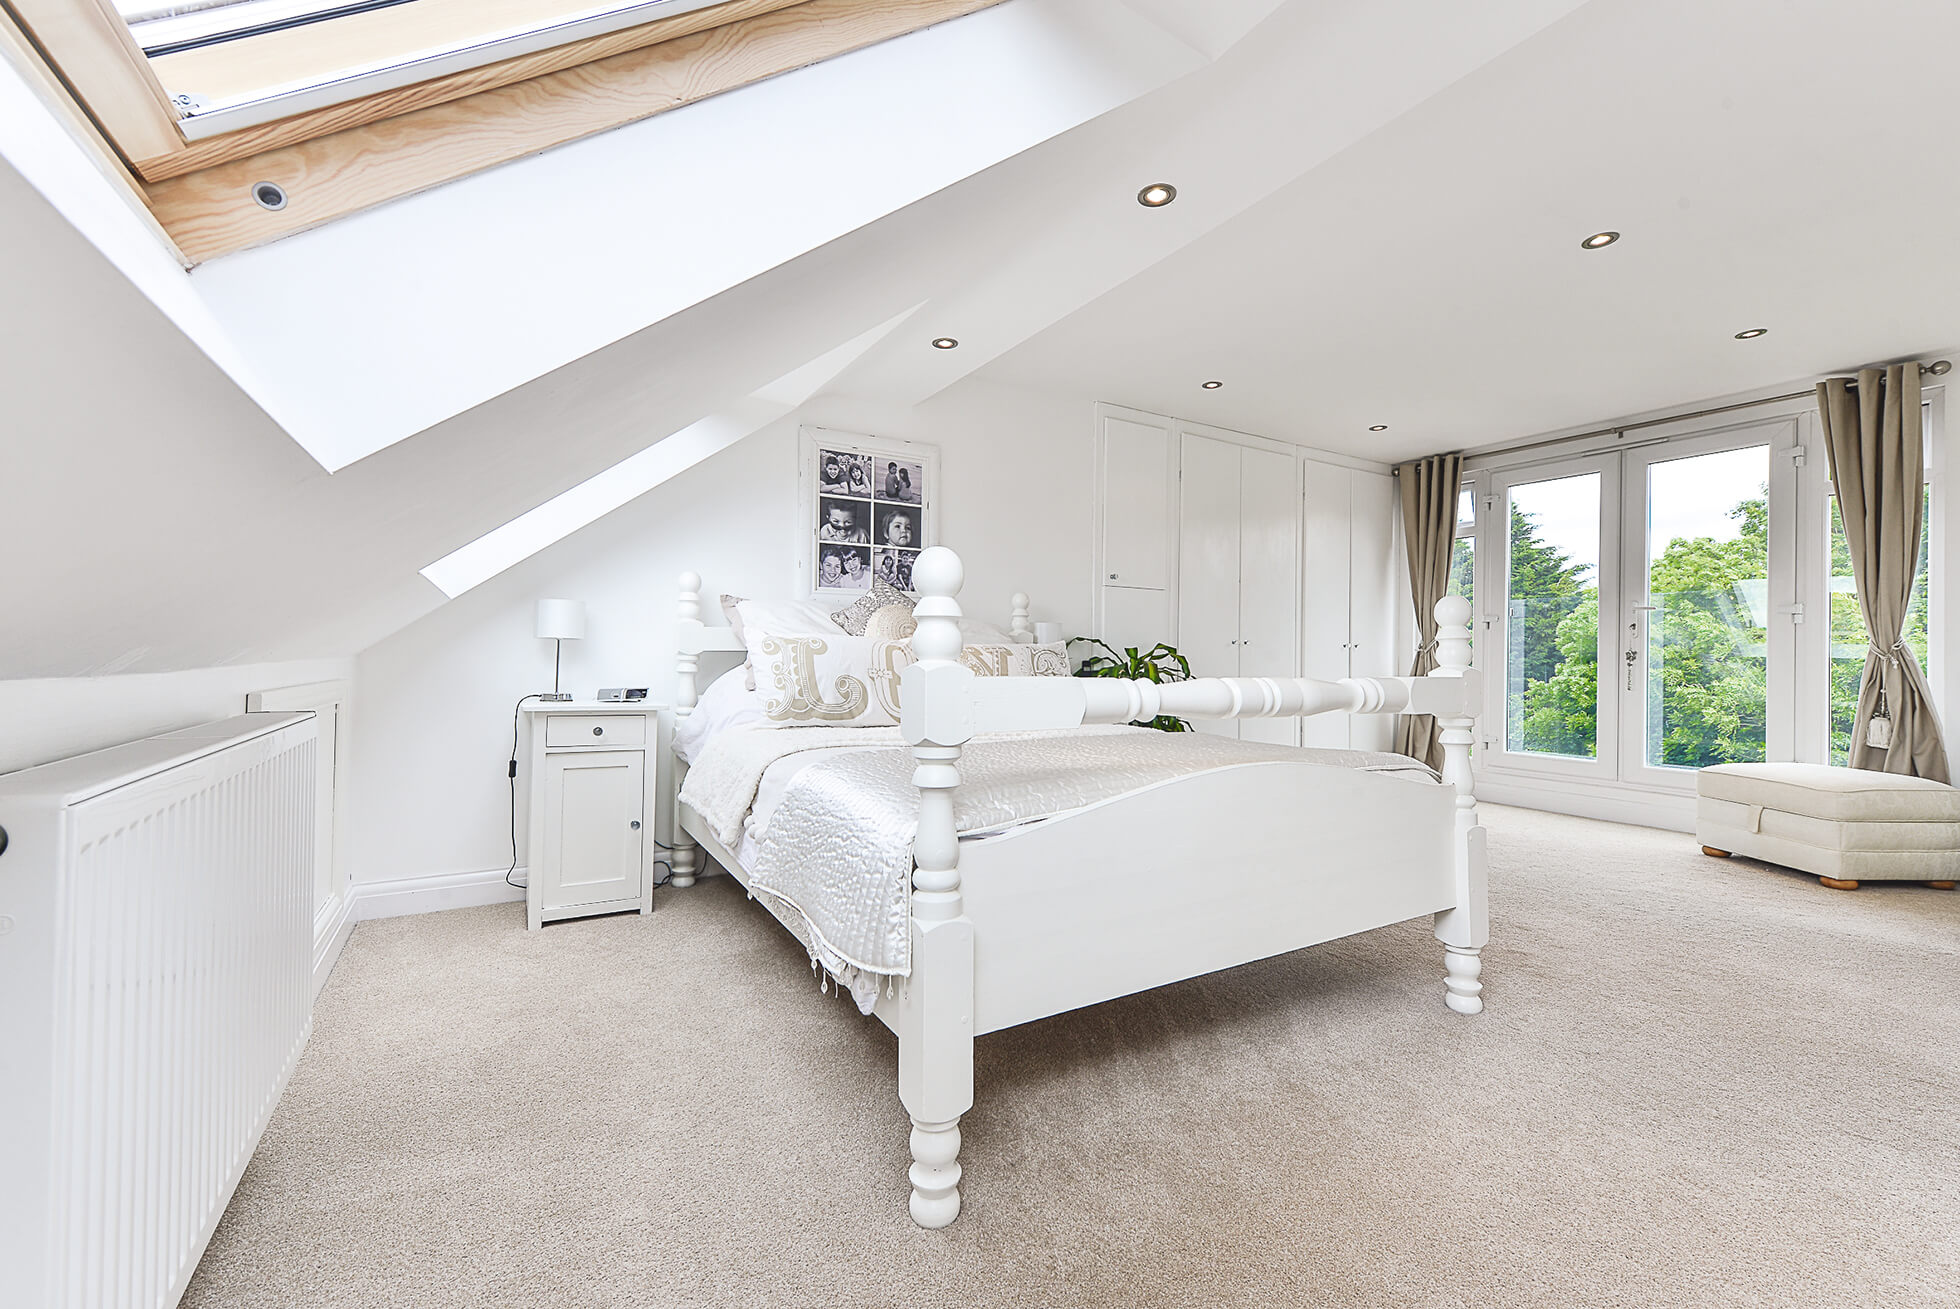 Do you have a question about converting your Loft in Hitchin? Here are the most popular questions asked by our clients.